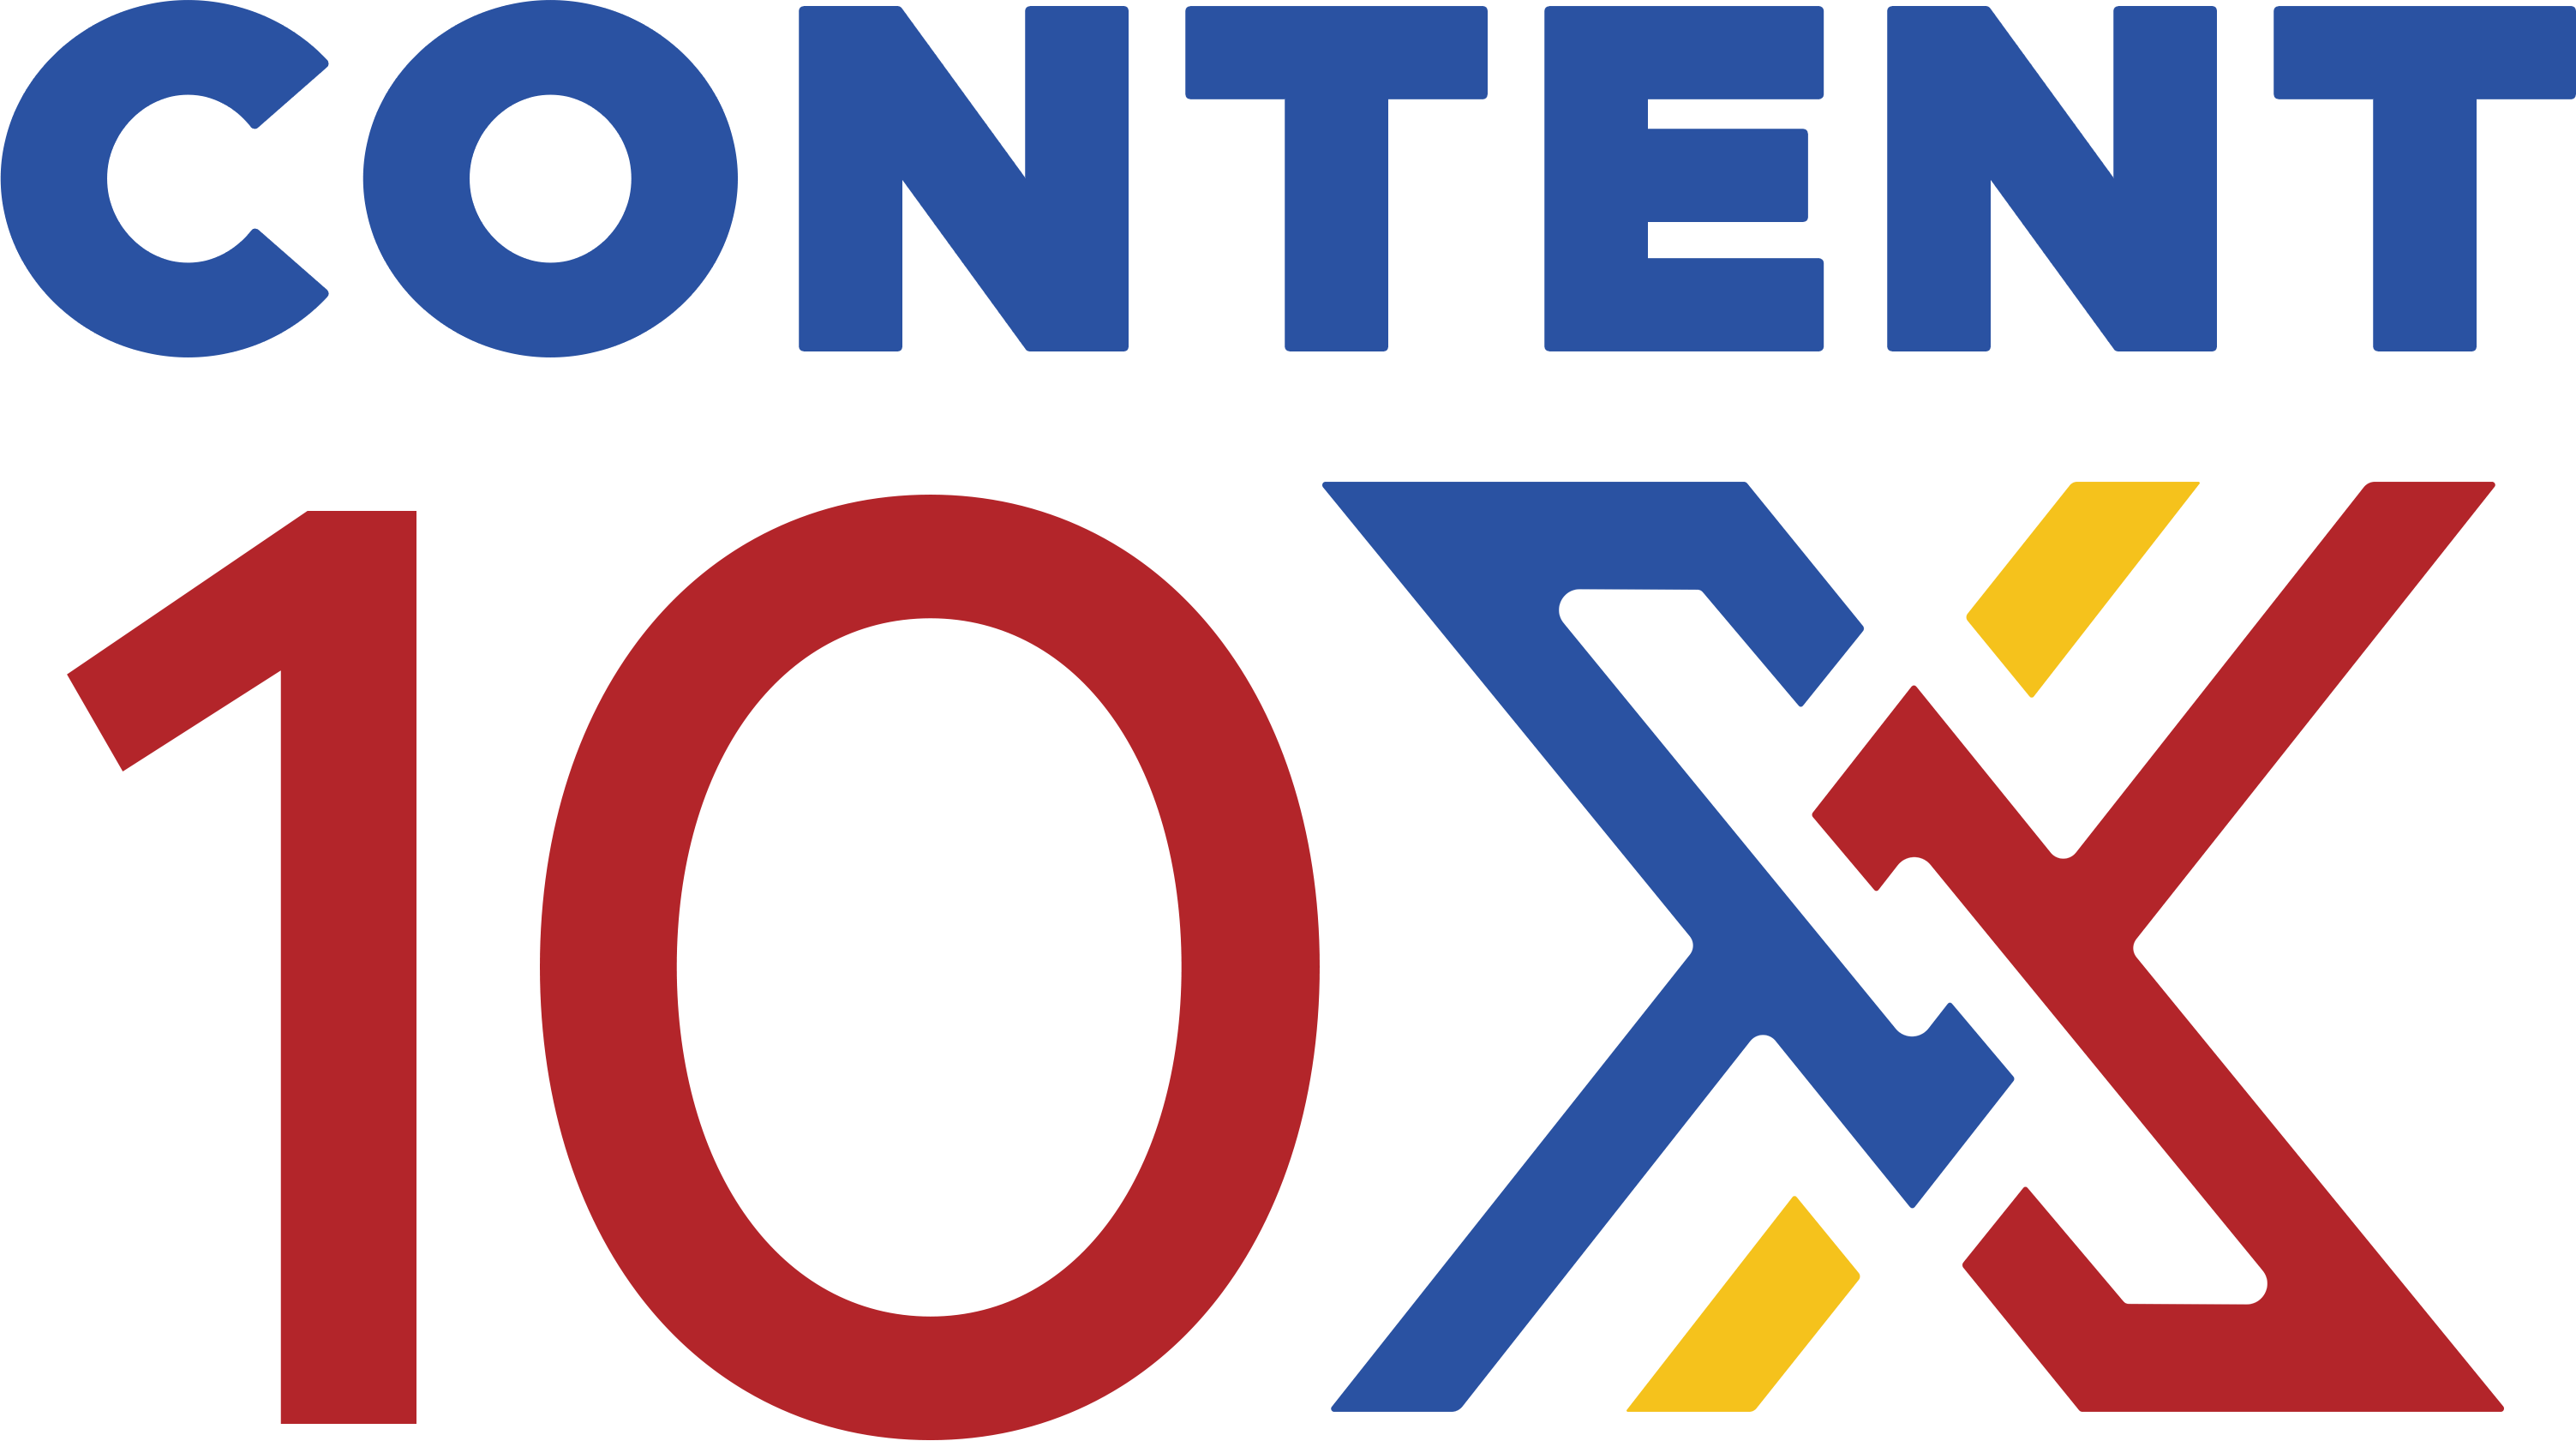 The Content 10x Podcast